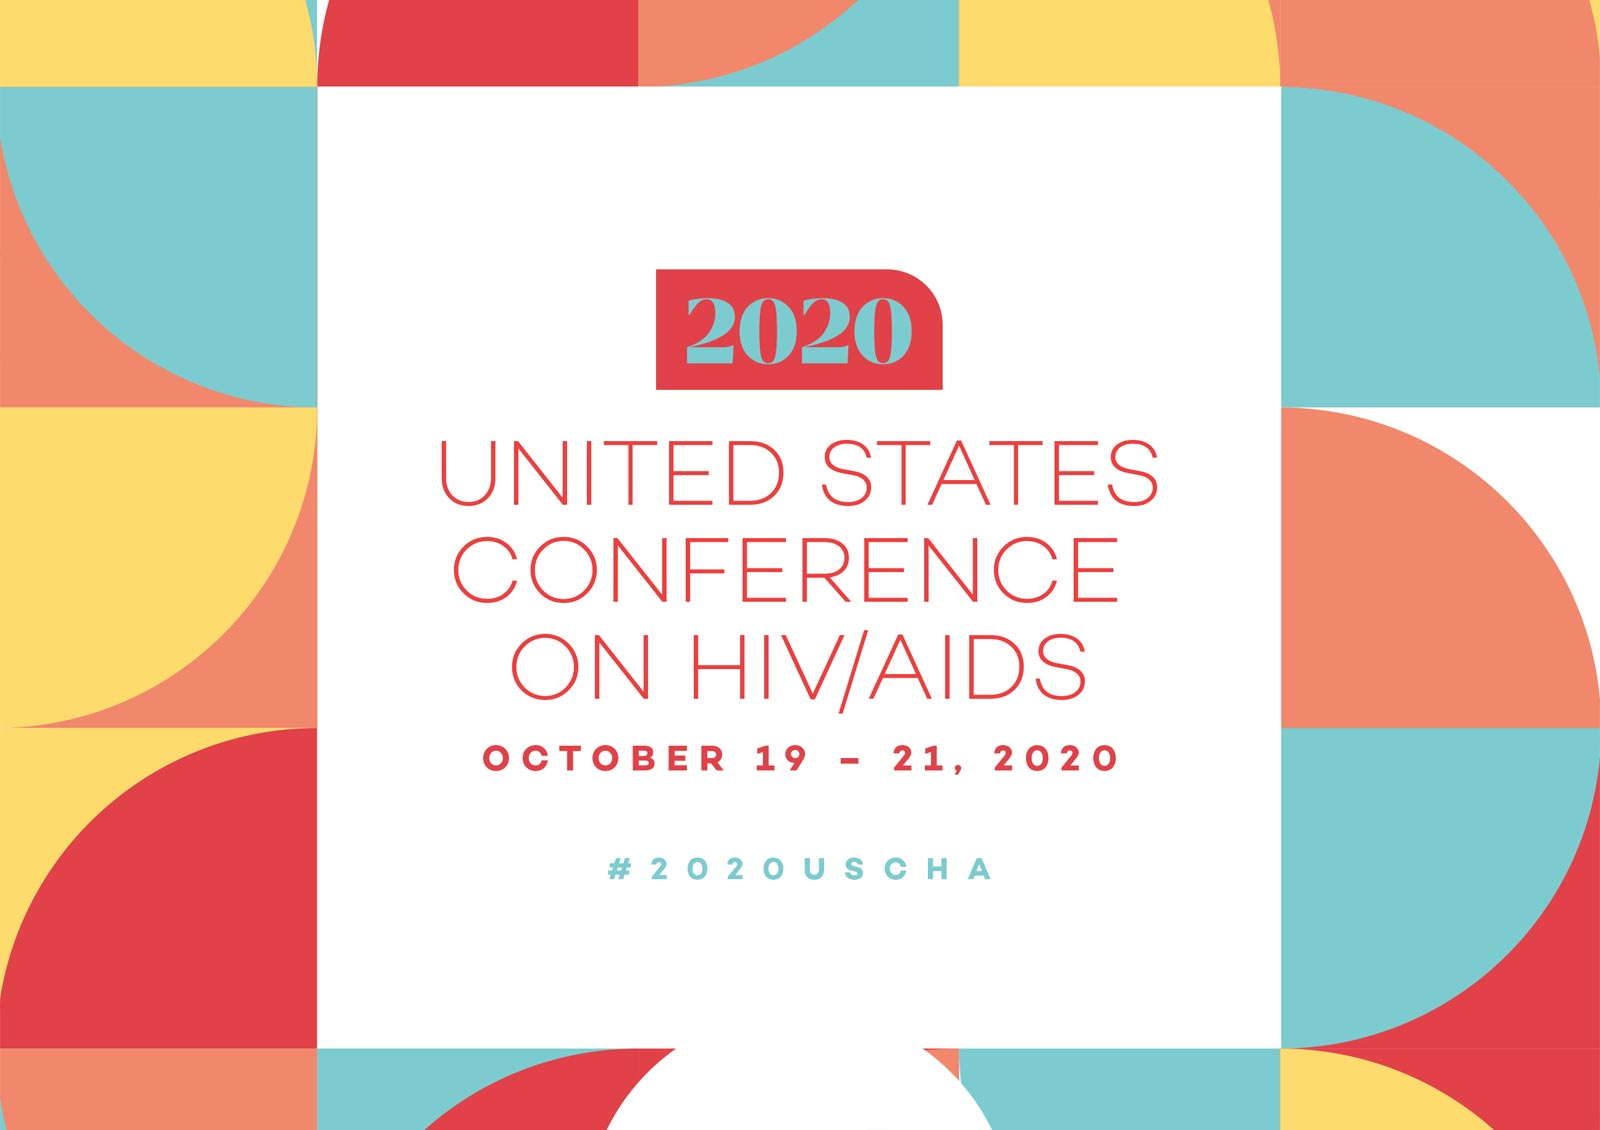 United States Conference on HIV/AIDS, October 19-21, 2020